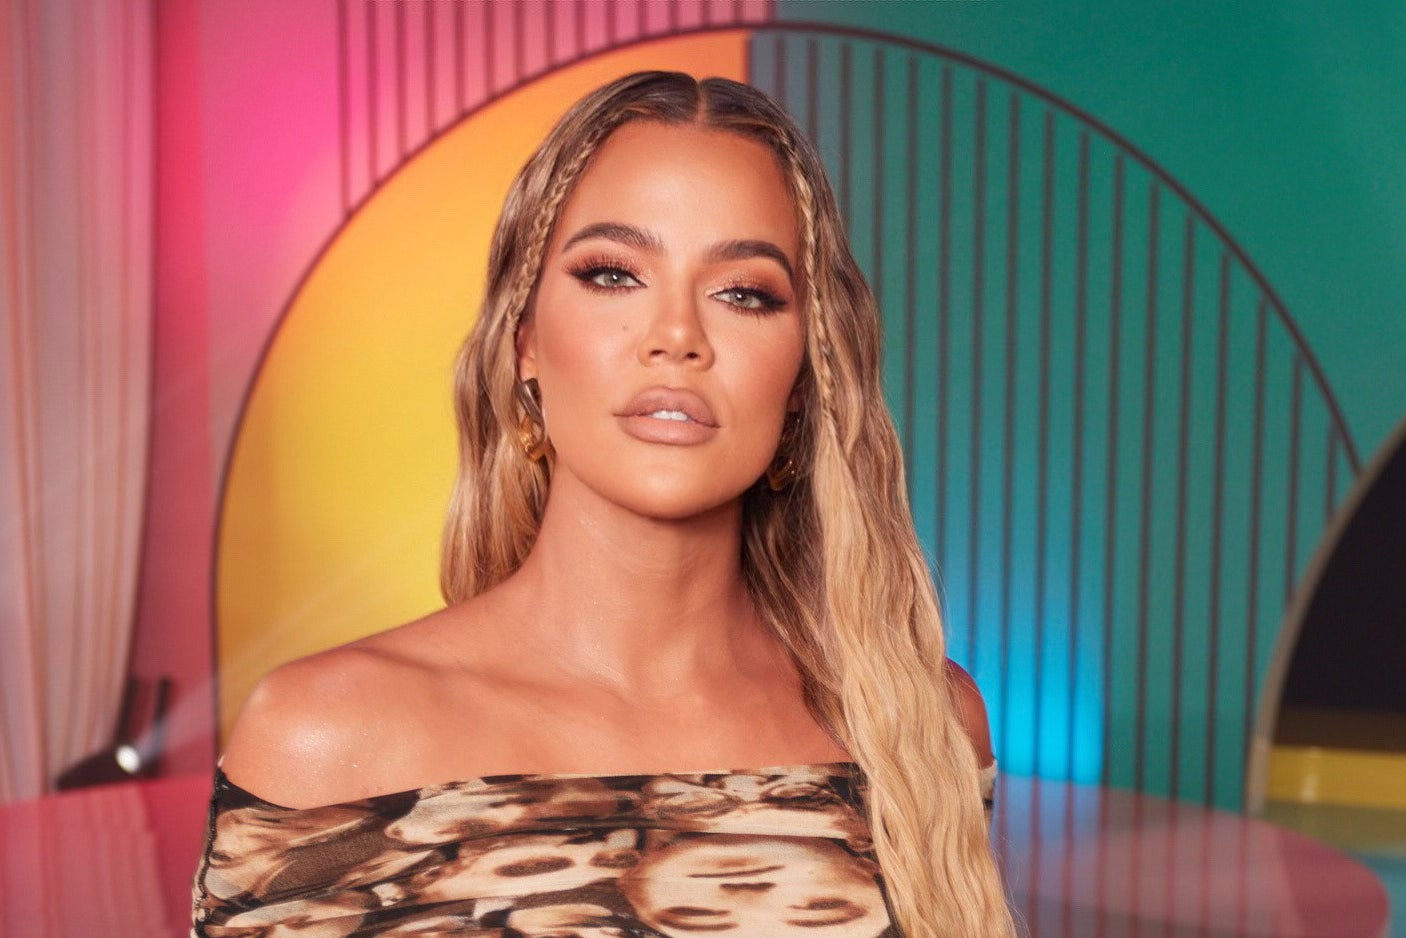 Khloé Kardashian Is Facing Backlash For Selling Her Daughter's Used Clothes For Hundreds Of Dollars Years After She Apparently Sold A "Loaned" Designer Sample And Caused Huge Drama